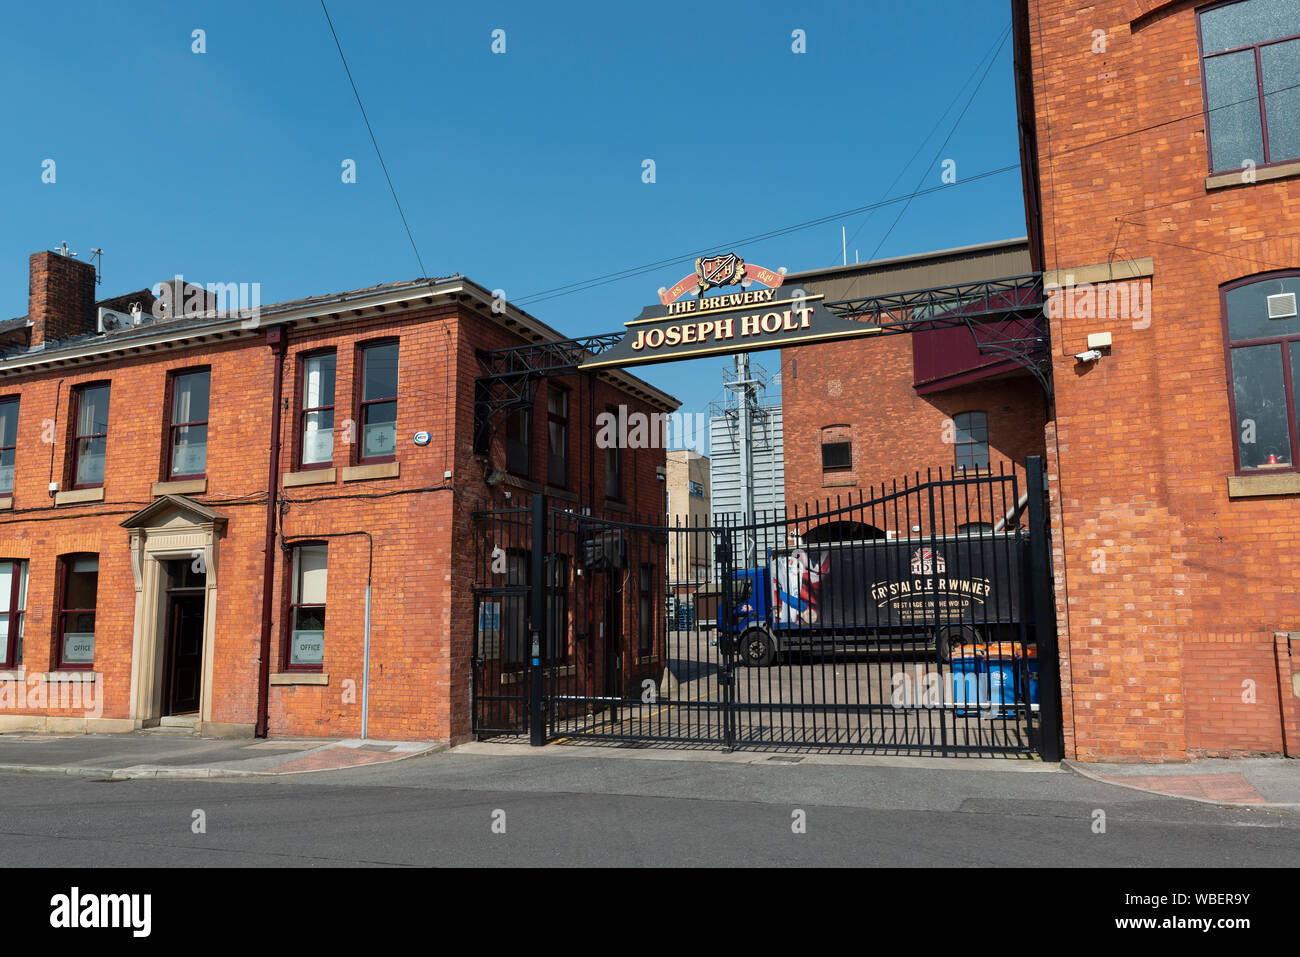 The entrance to Joseph Holt brewery located on Empire Street in the Strangeways area of Manchester, UK. Stock Photo